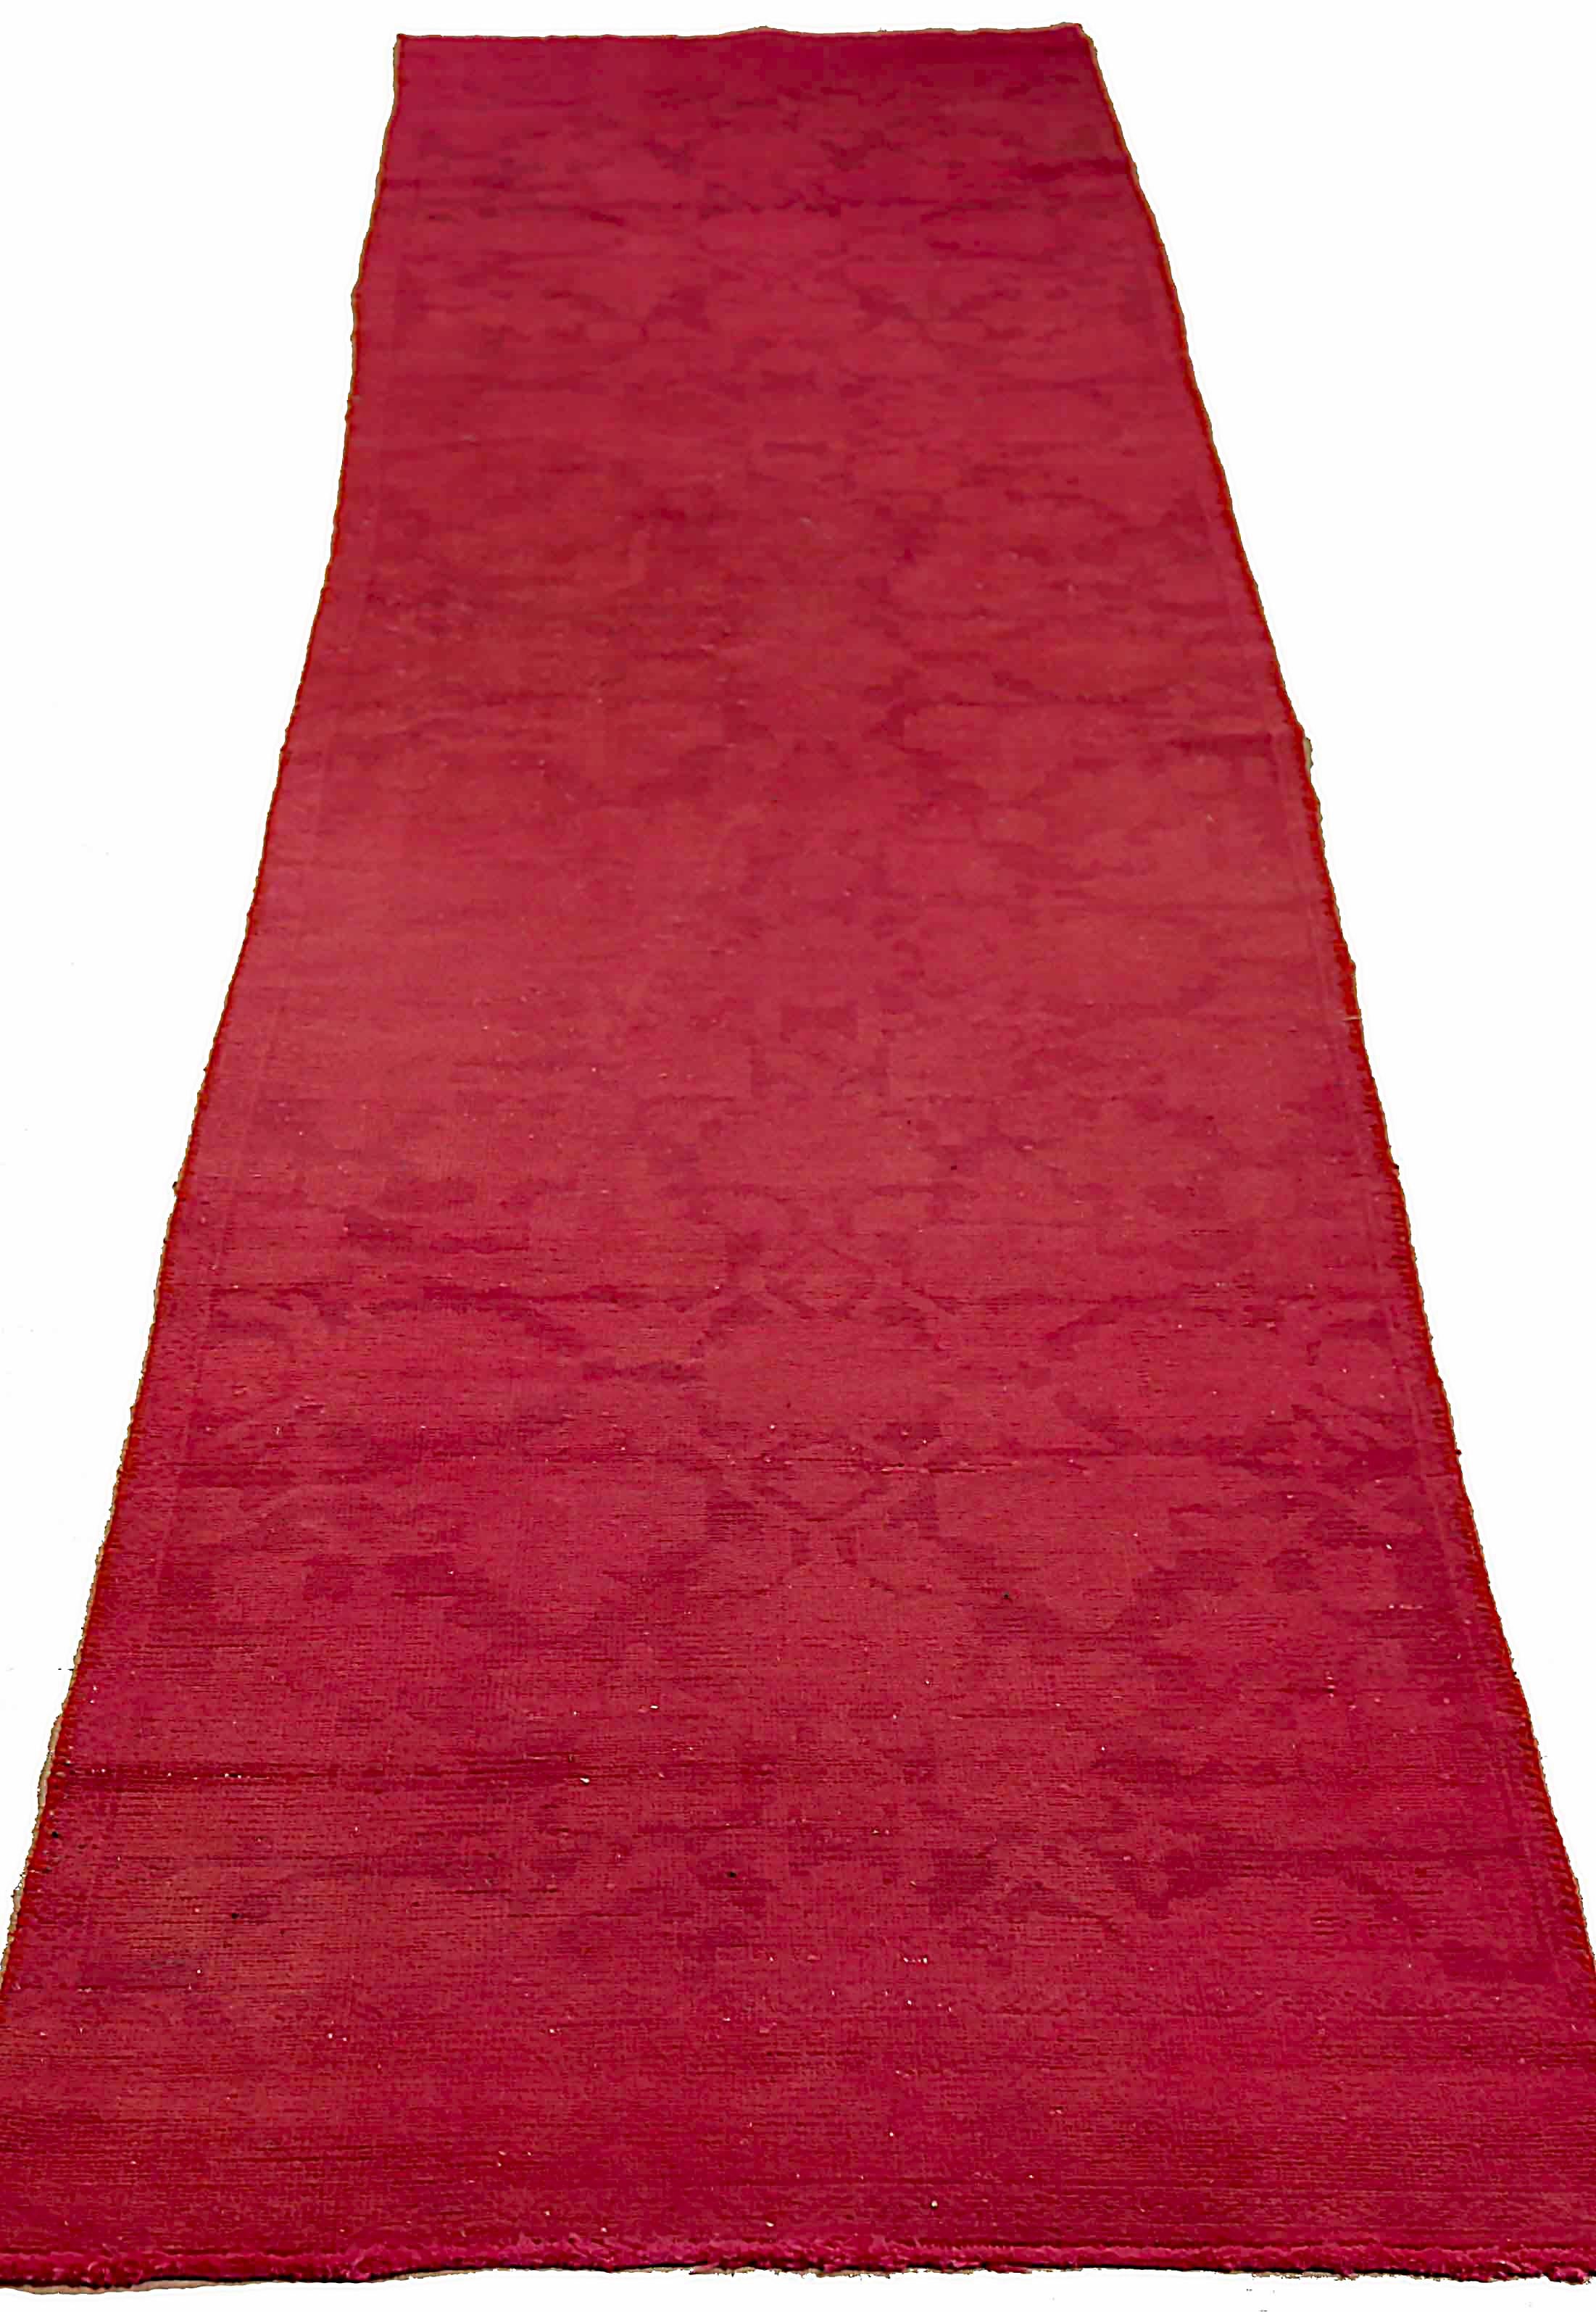 Antique handmade Persian area rug from high quality sheep’s wool and colored with eco-friendly vegetable dyes that are proven safe for humans and pets alike. It’s a Classic Overdye design showcasing a pink field with prominent Herati flower heads